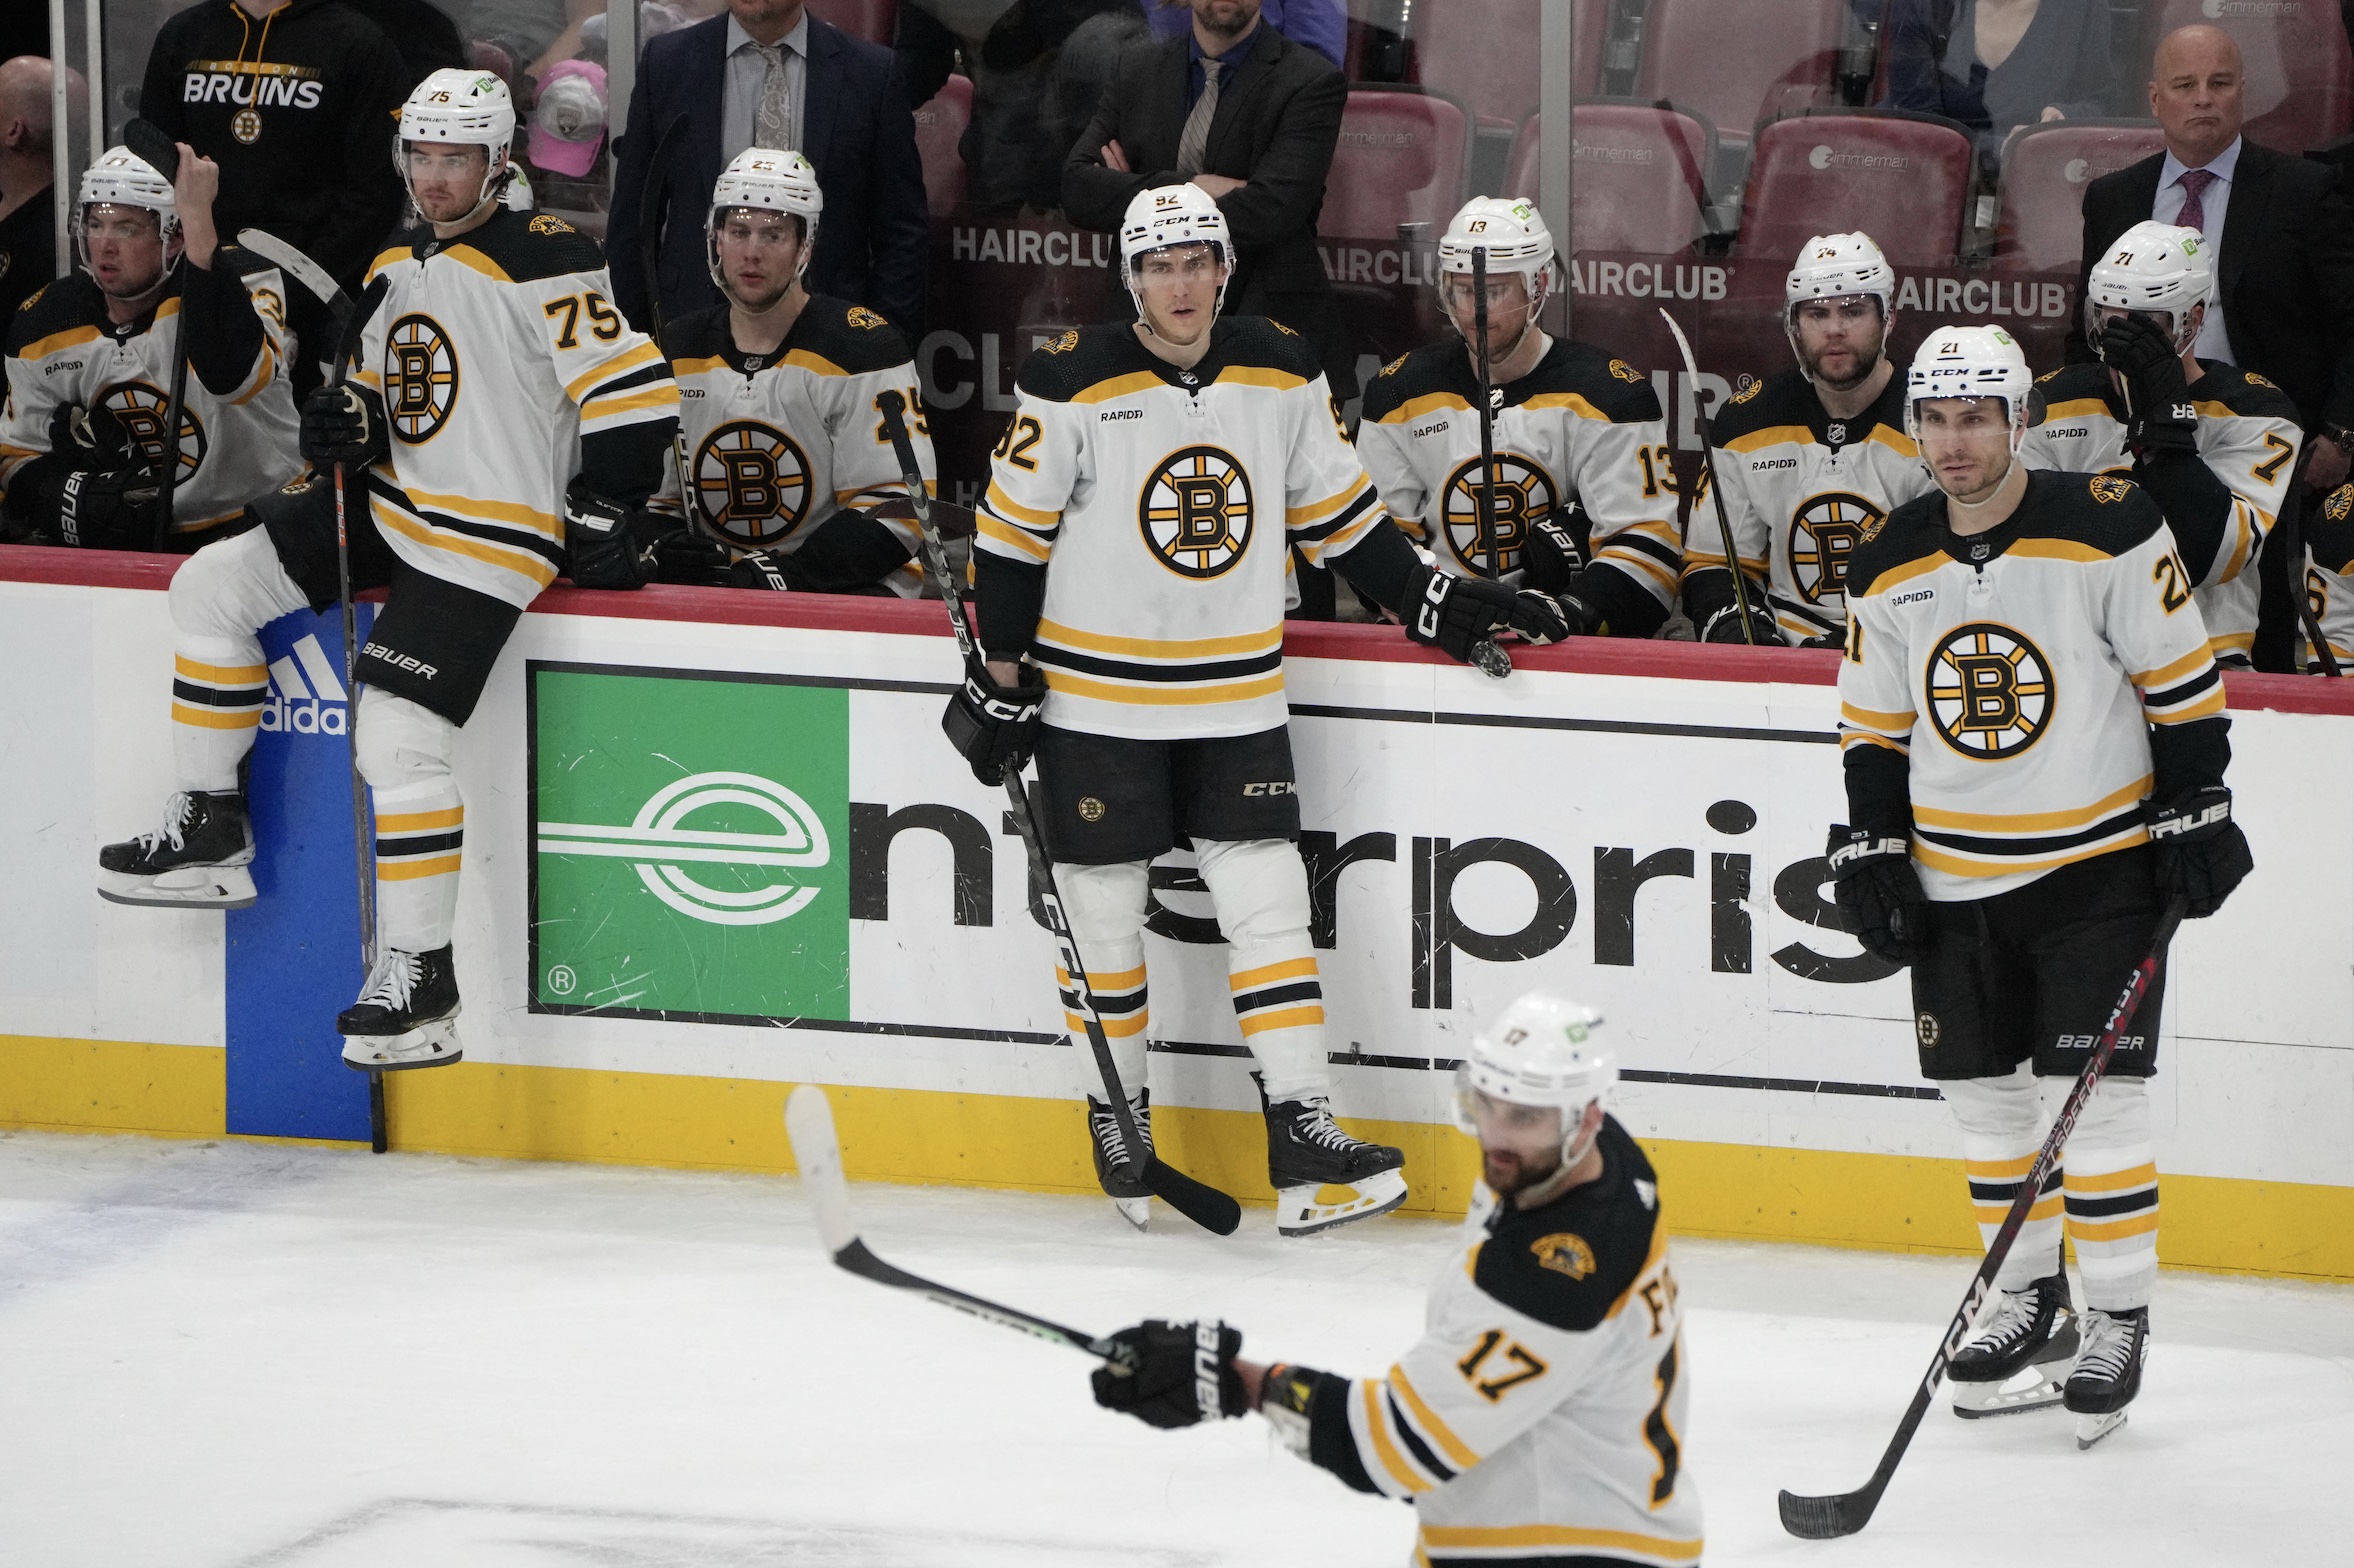 What We Learned: How far will the Bruins fall?